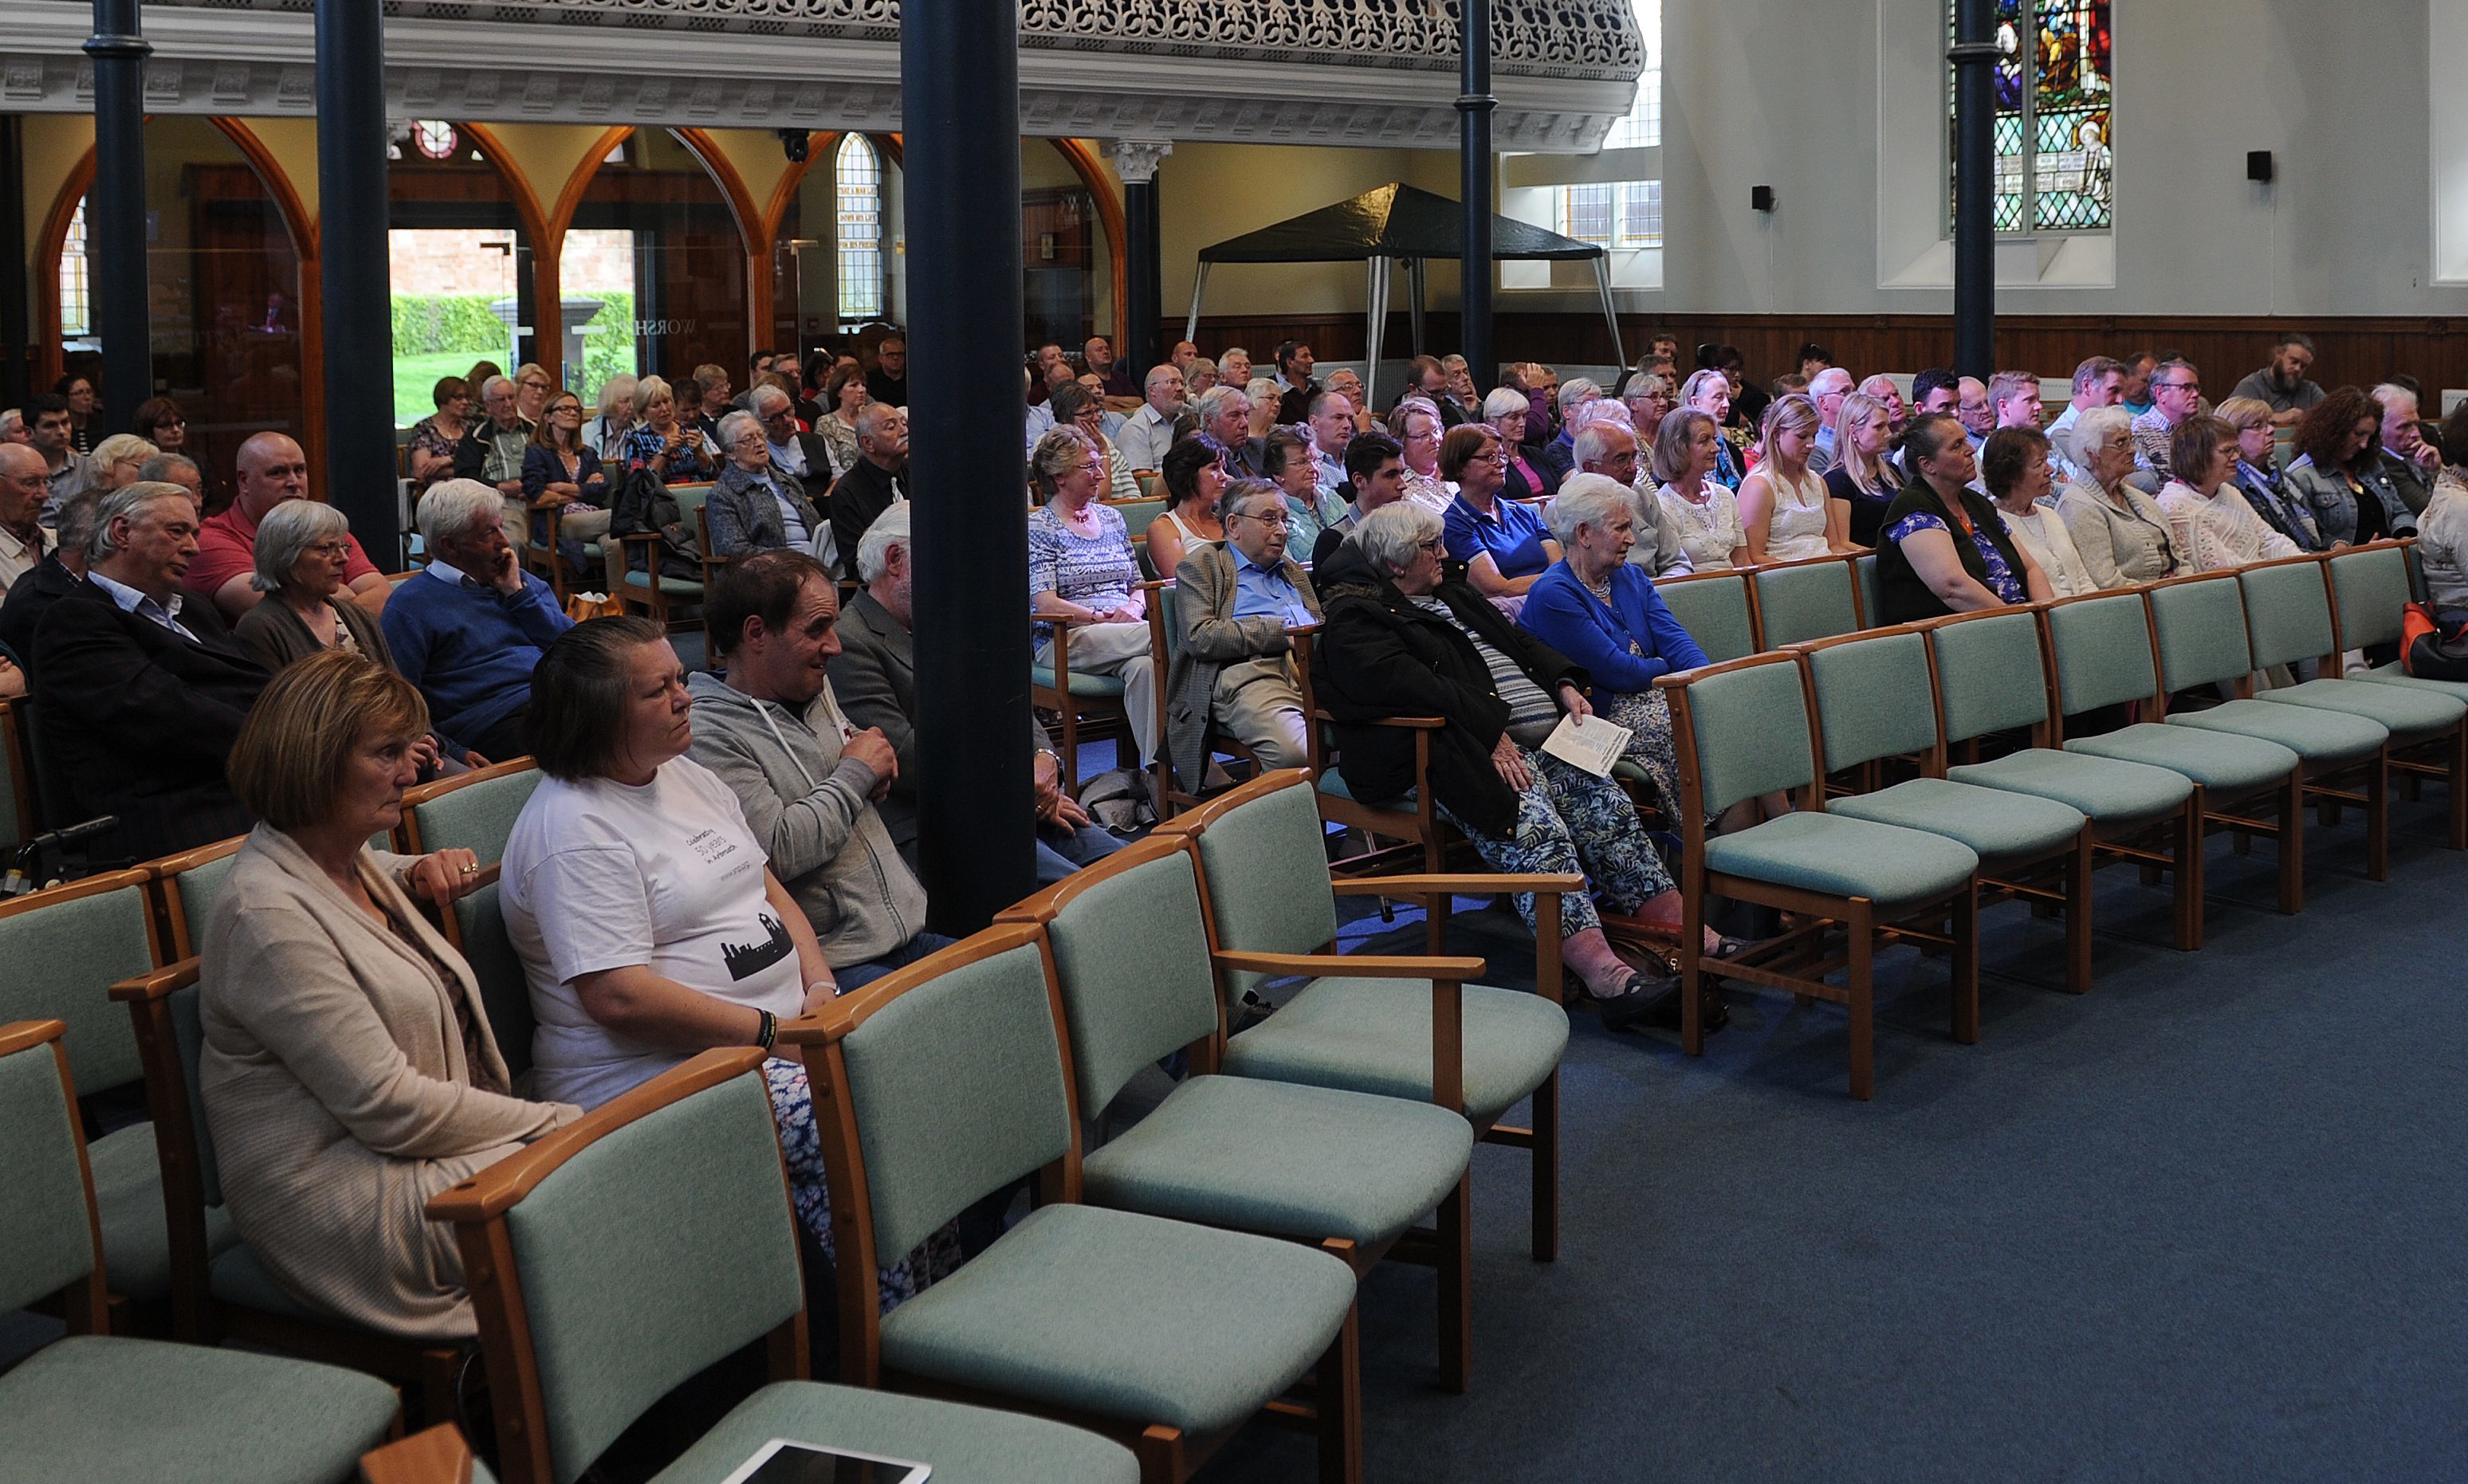 The audience at St Andrews Church, Arbroath.